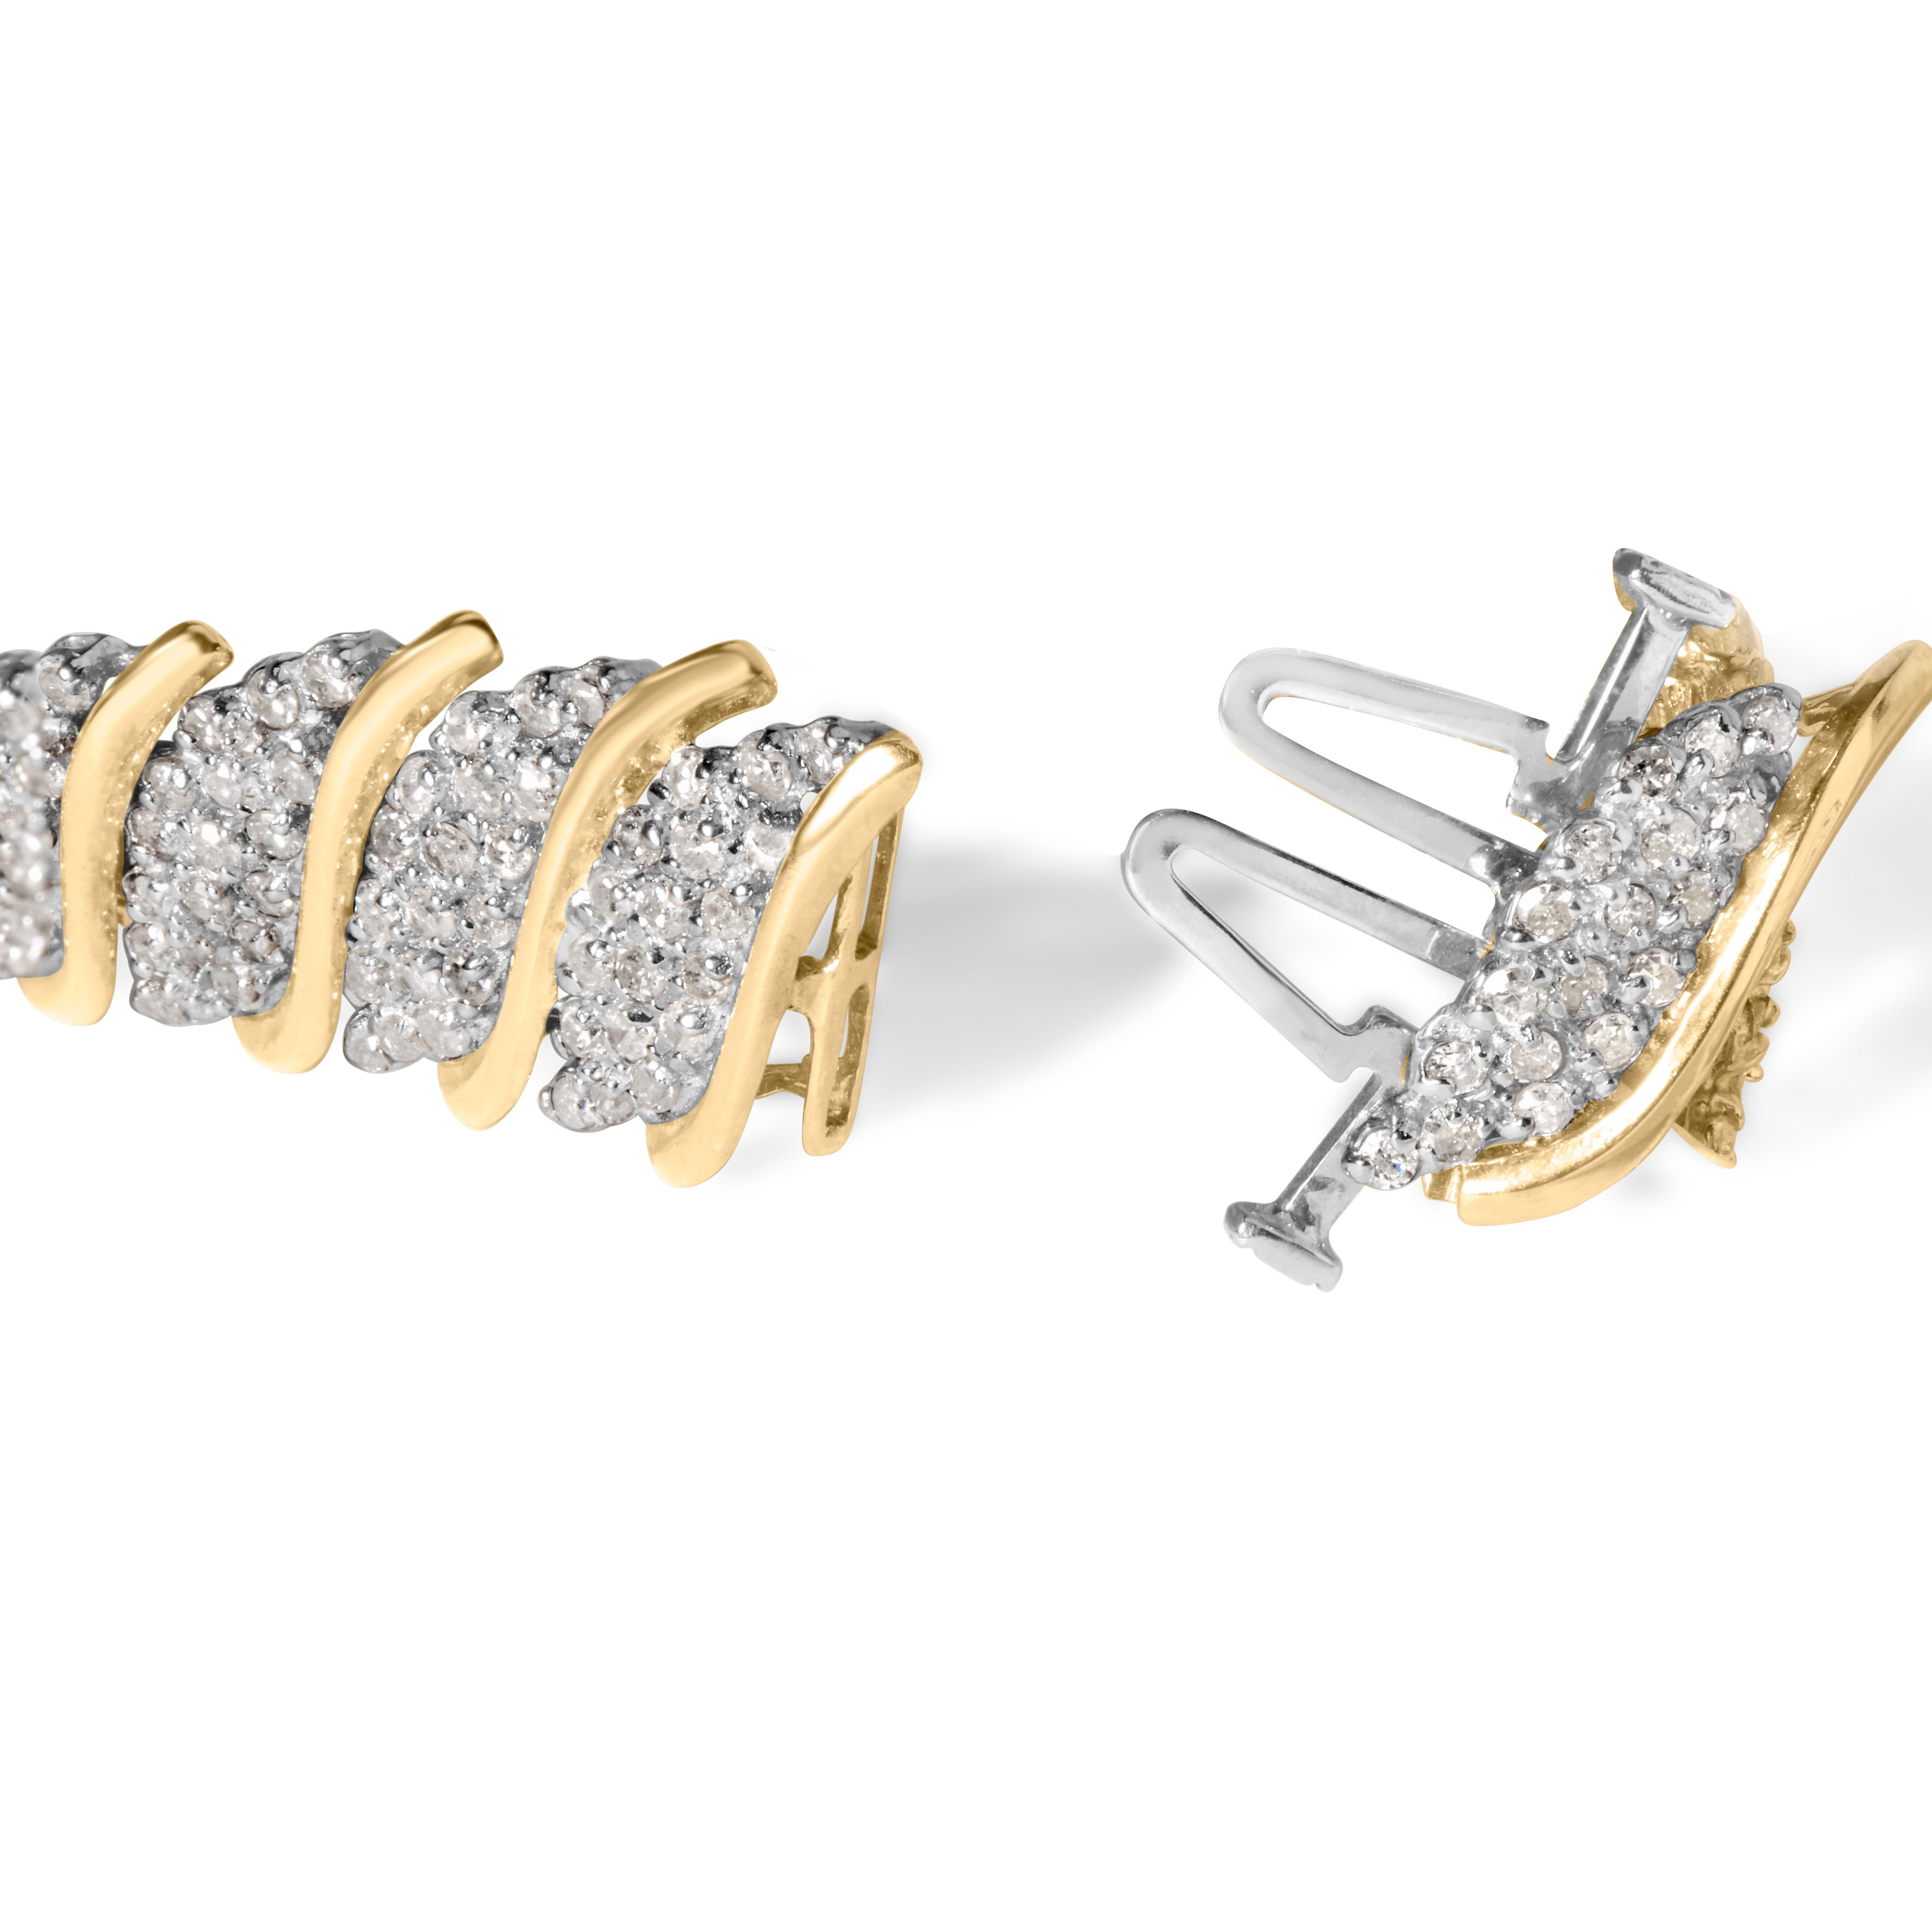 Indulge in the luxurious beauty of this exquisite 10K yellow gold pave diamond S-link bracelet. Adorned with 414 round diamonds, the bracelet's 6.0 cttw total weight radiates a breathtaking brilliance, each diamond boasting a natural origin, H-I